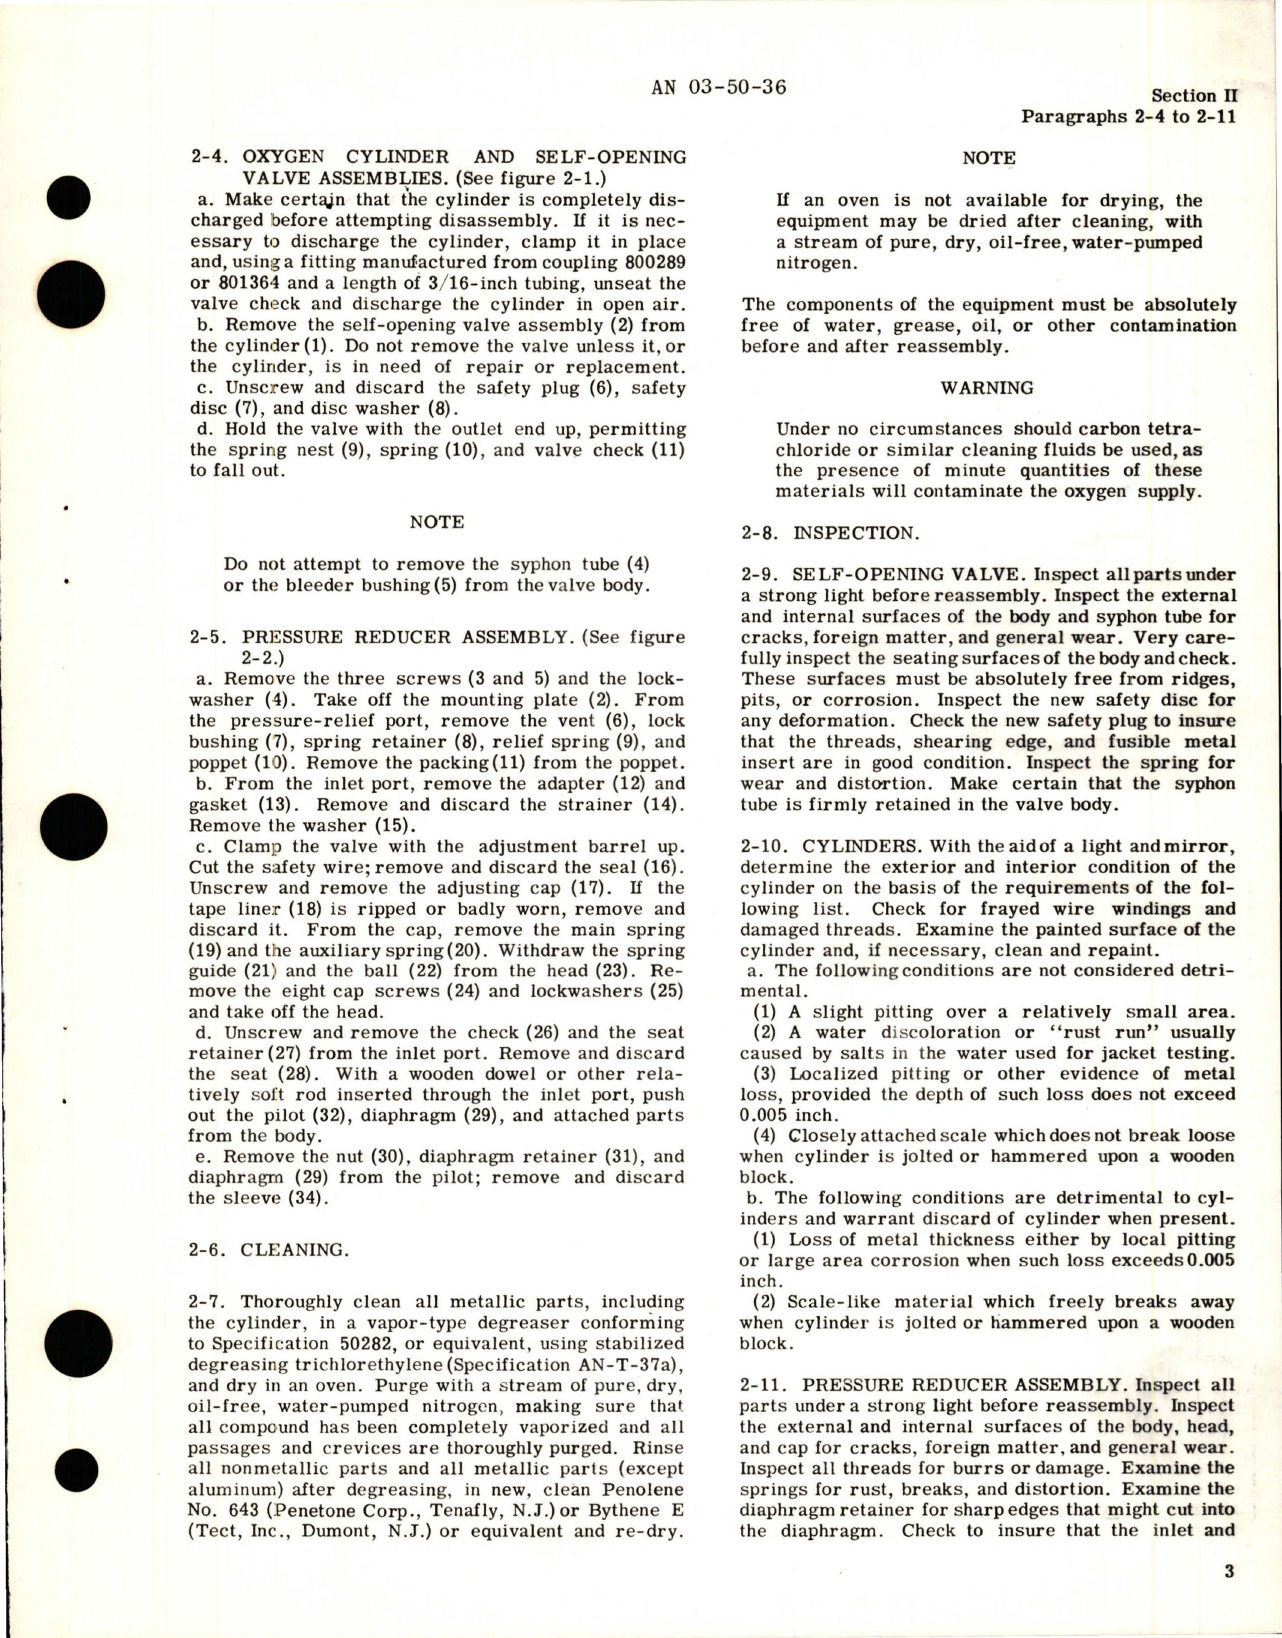 Sample page 7 from AirCorps Library document: Overhaul Instructions for Oxygen Cylinder and Self-Opening Valve, and Pressure Reducer Assembly 